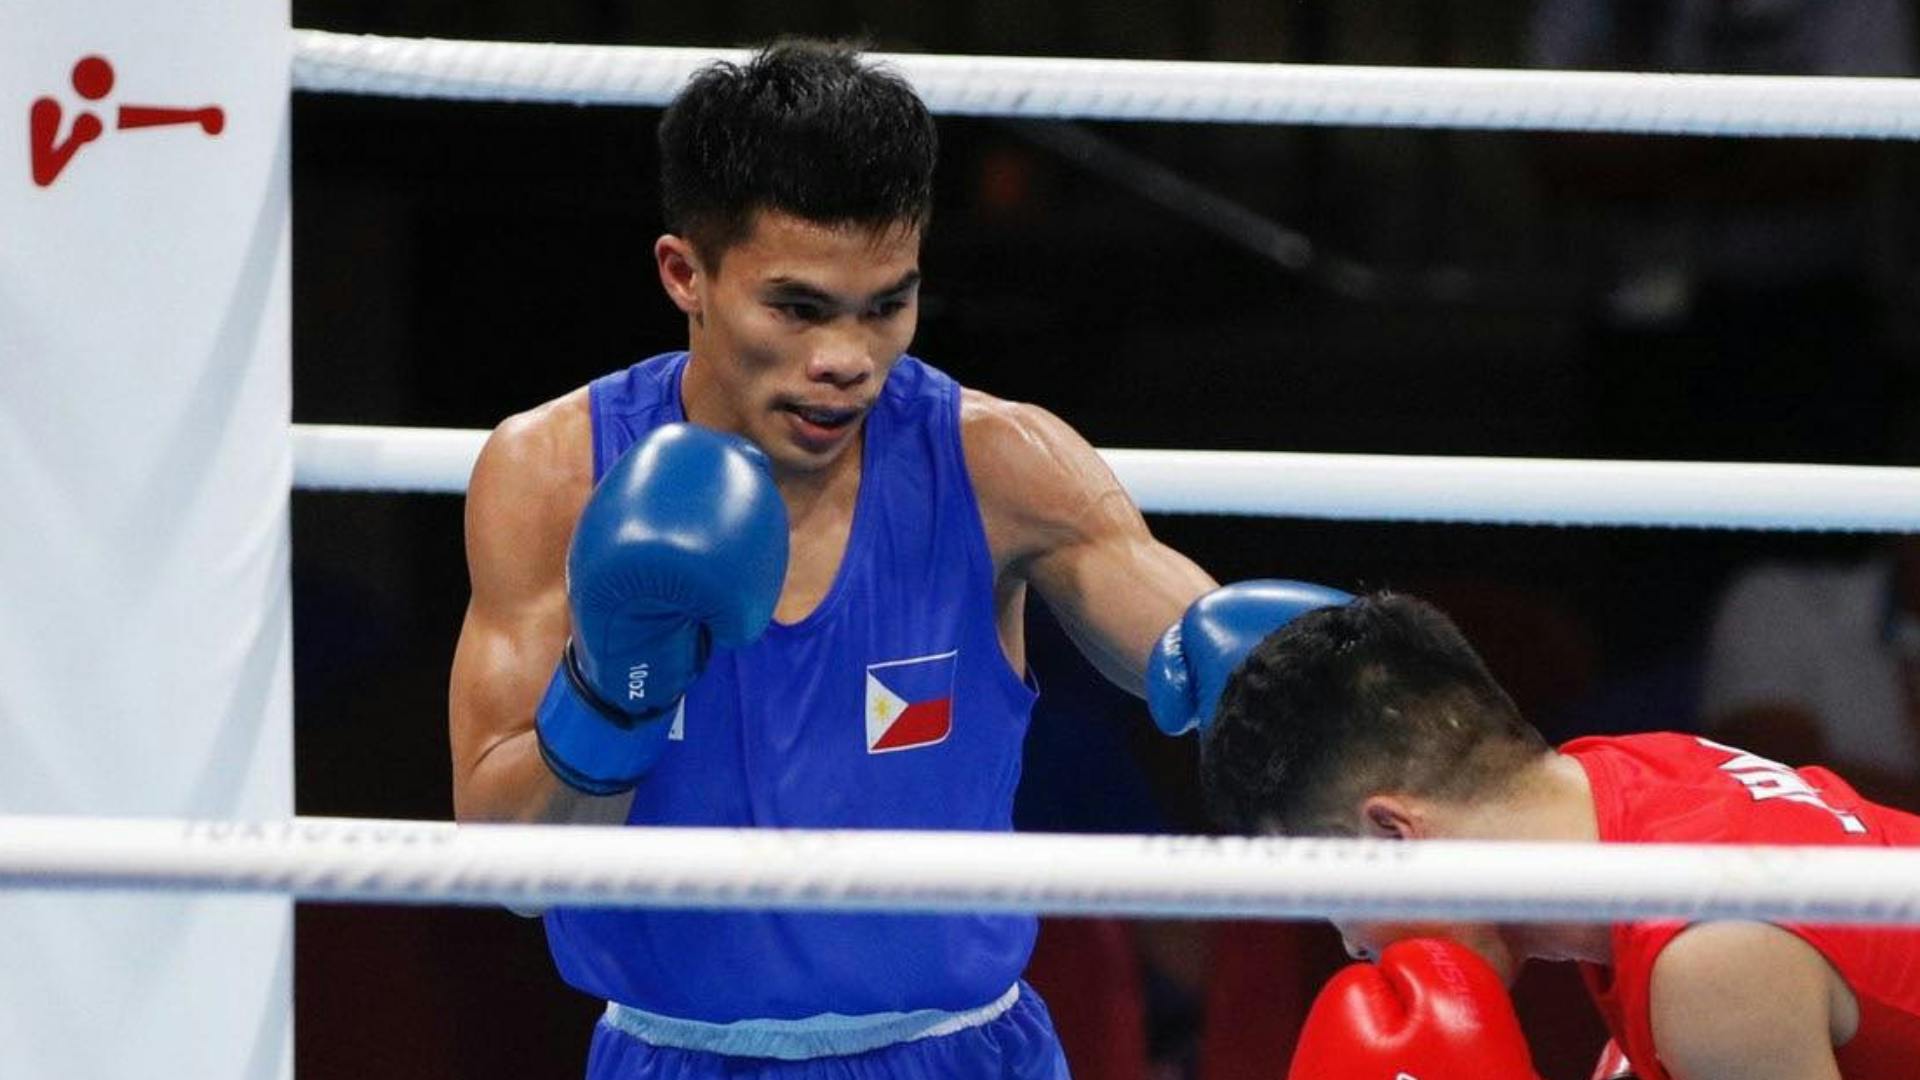 Bonjour! Carlo Paalam punches ticket to Paris 2024, becomes 14th member of Philippine Olympic team